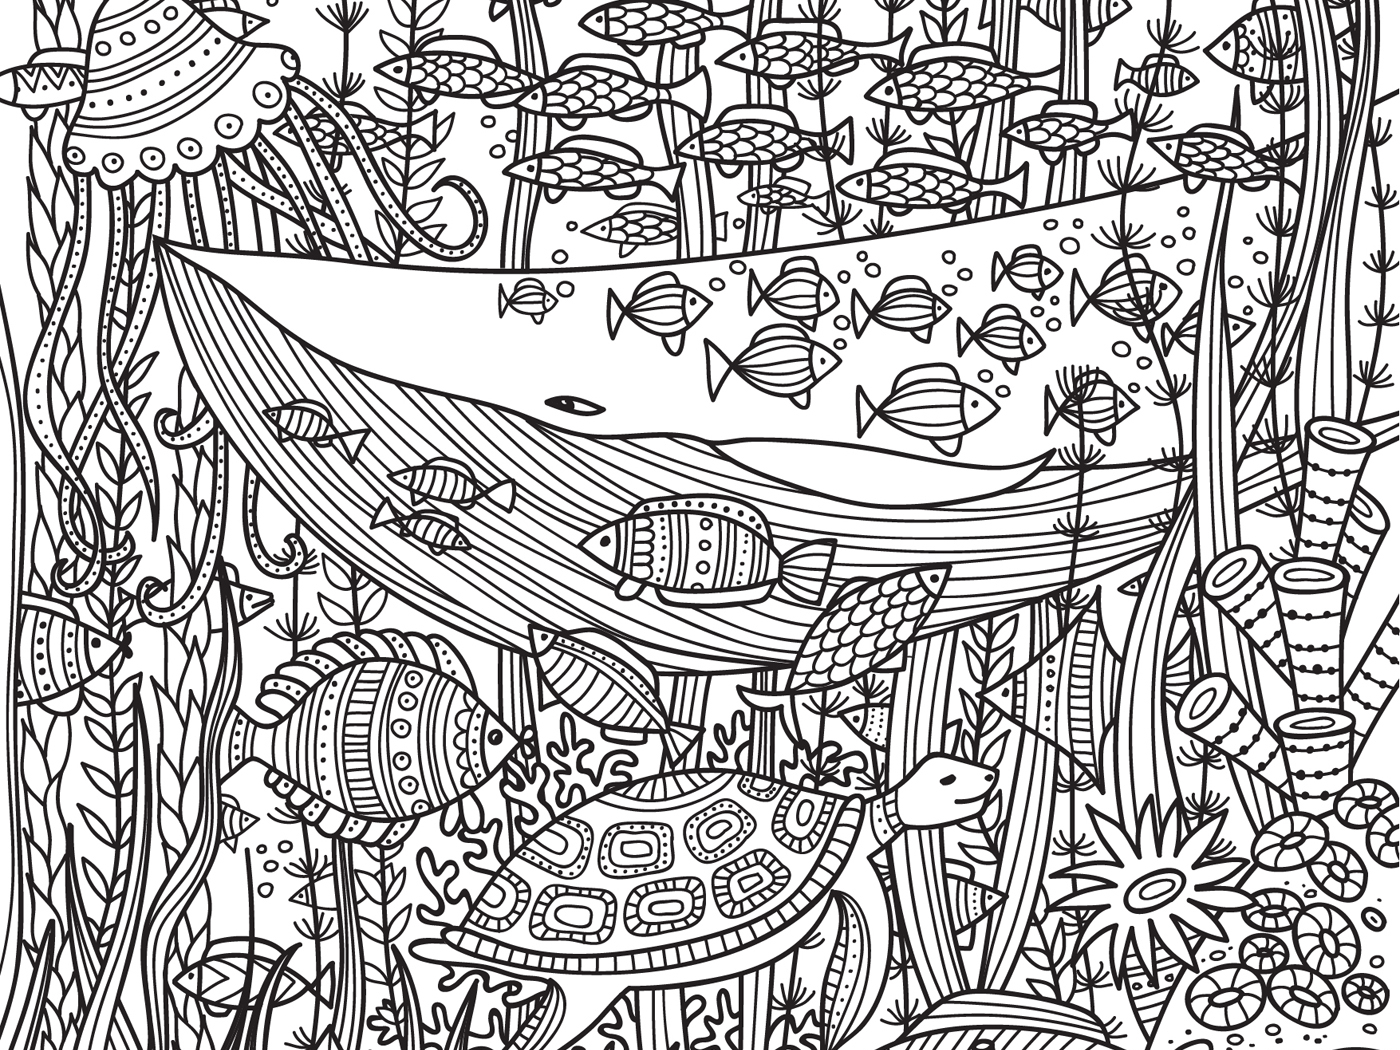 Underwater Life Coloring Page by Yuliia Bahniuk on Dribbble